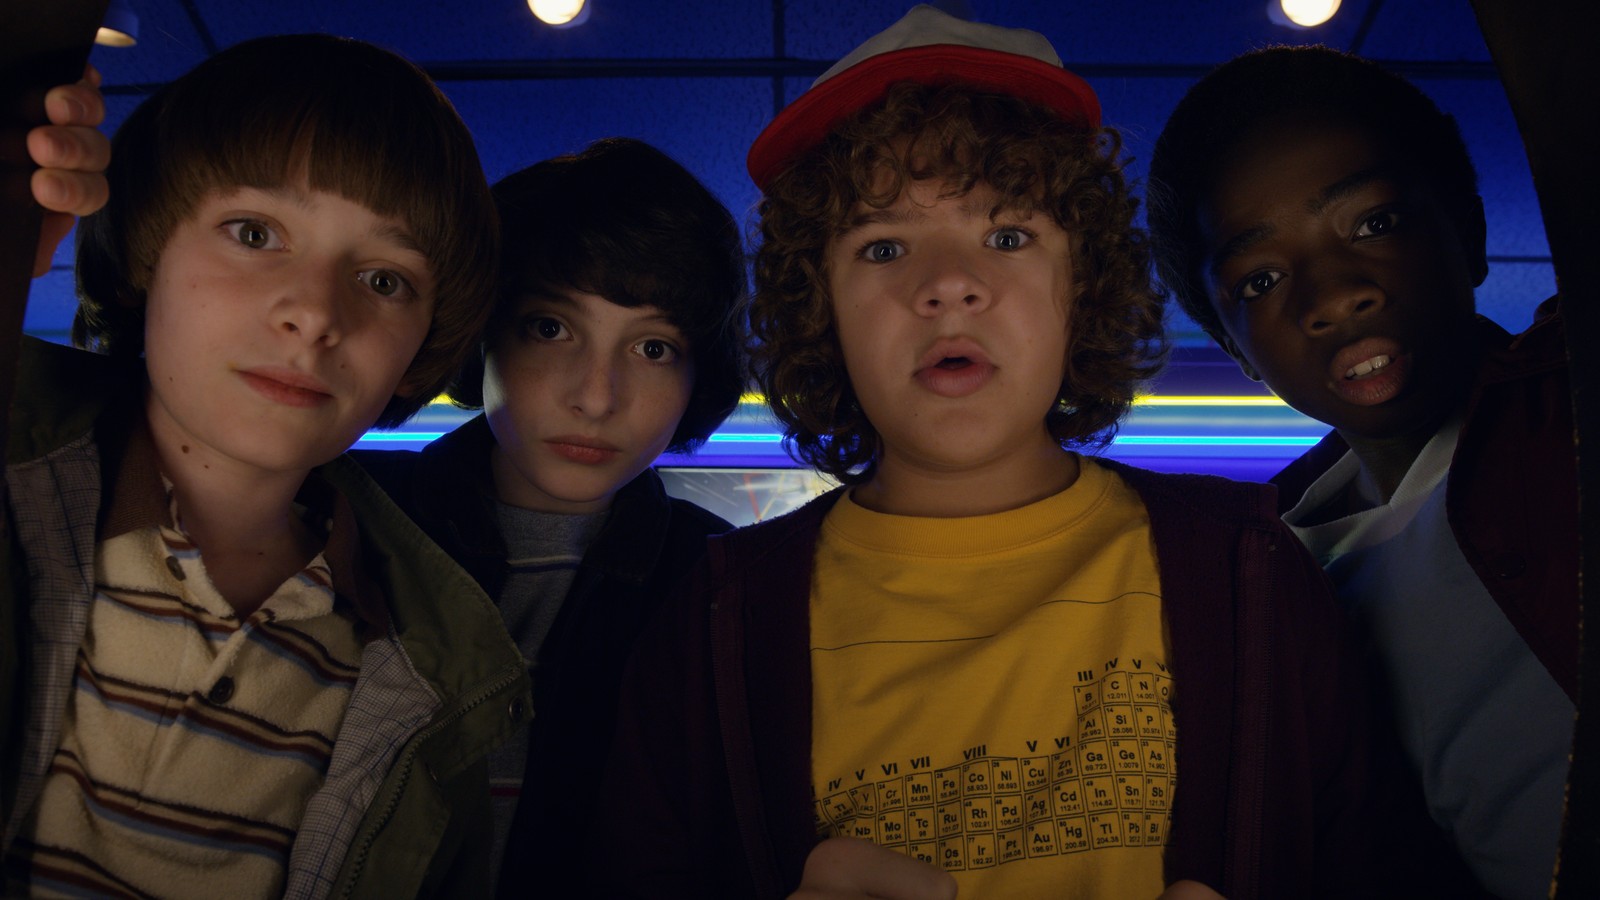 Stranger Things 2: Your first look at the Netflix hit